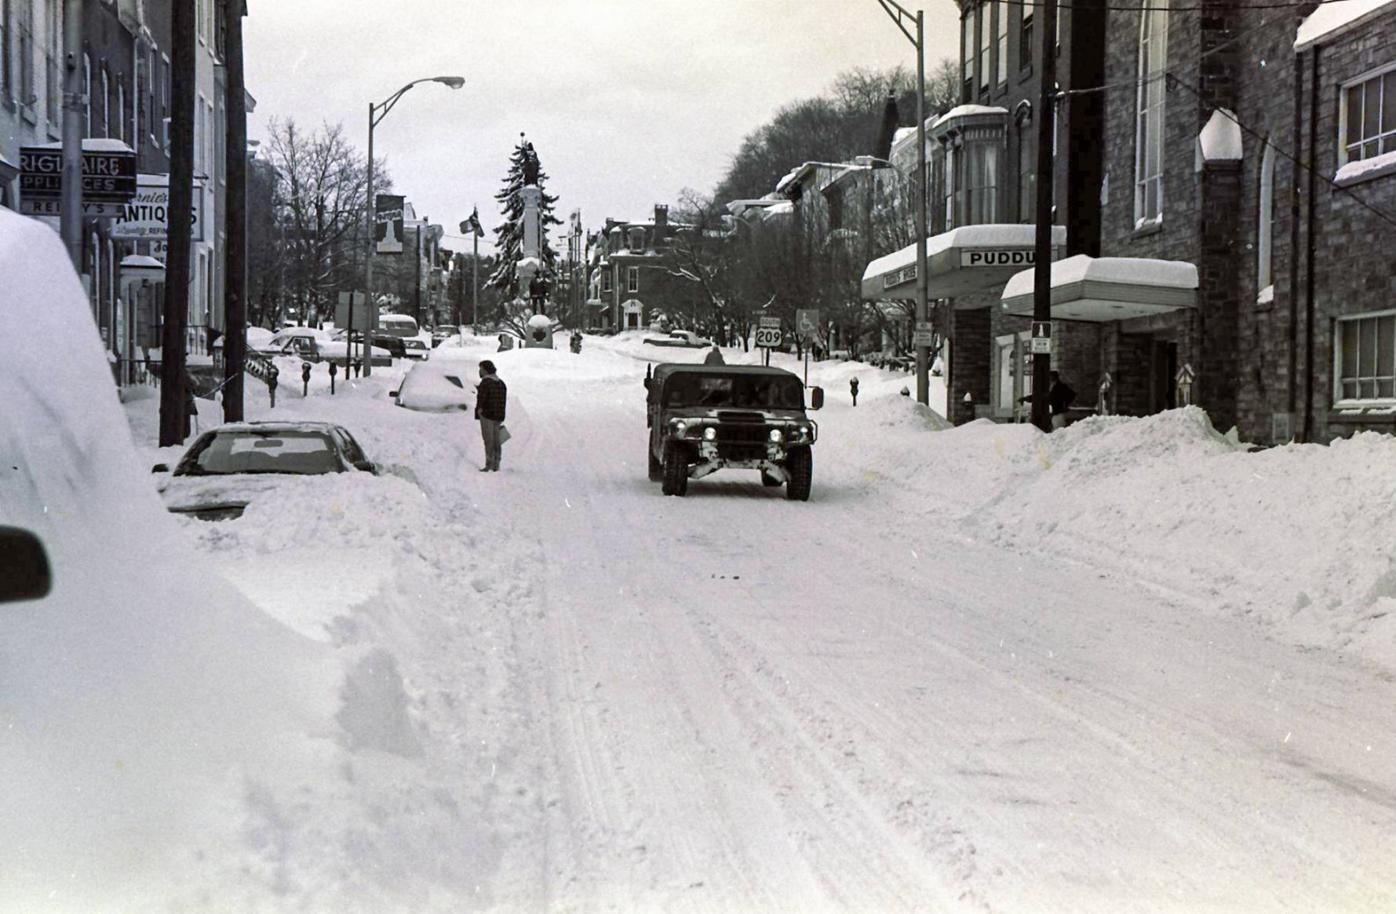 PHOTOS: Blizzard of 1996: A look back 25 years ago | News ...